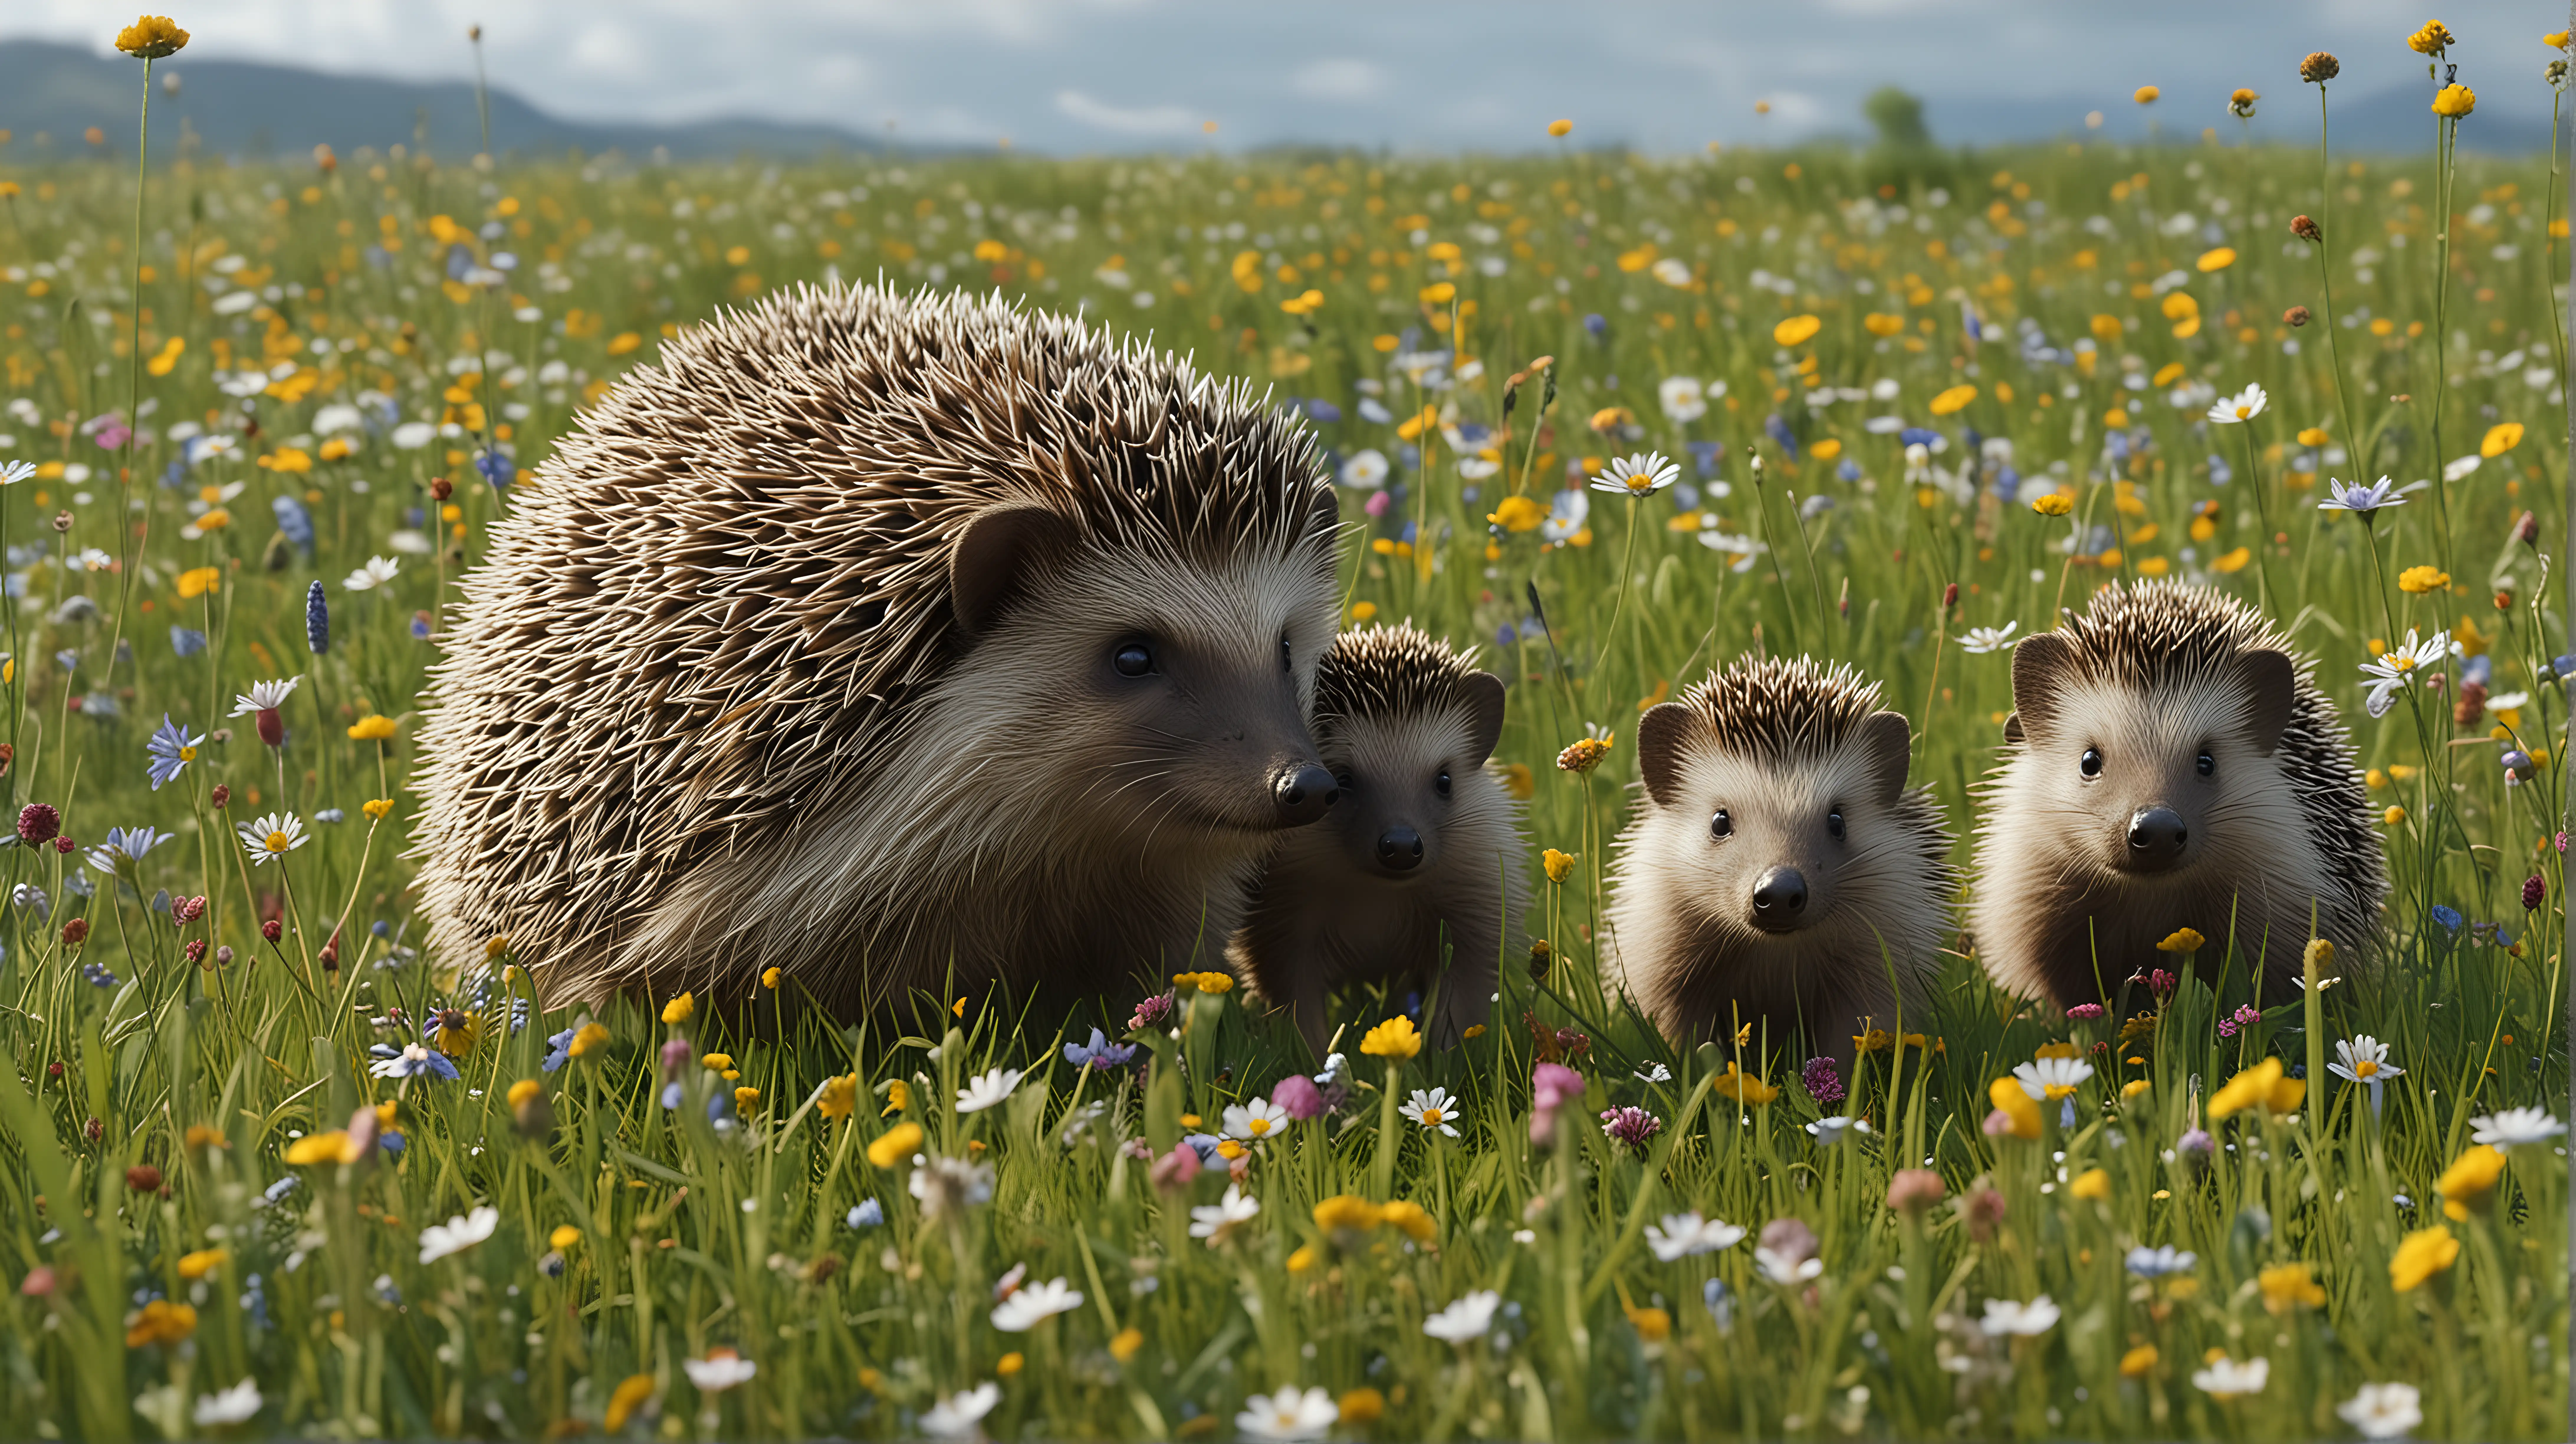 A hedgehog family can be seen amongst the wildflowers in a meadow.

Highly detailed, 4k, hyper-realistic.